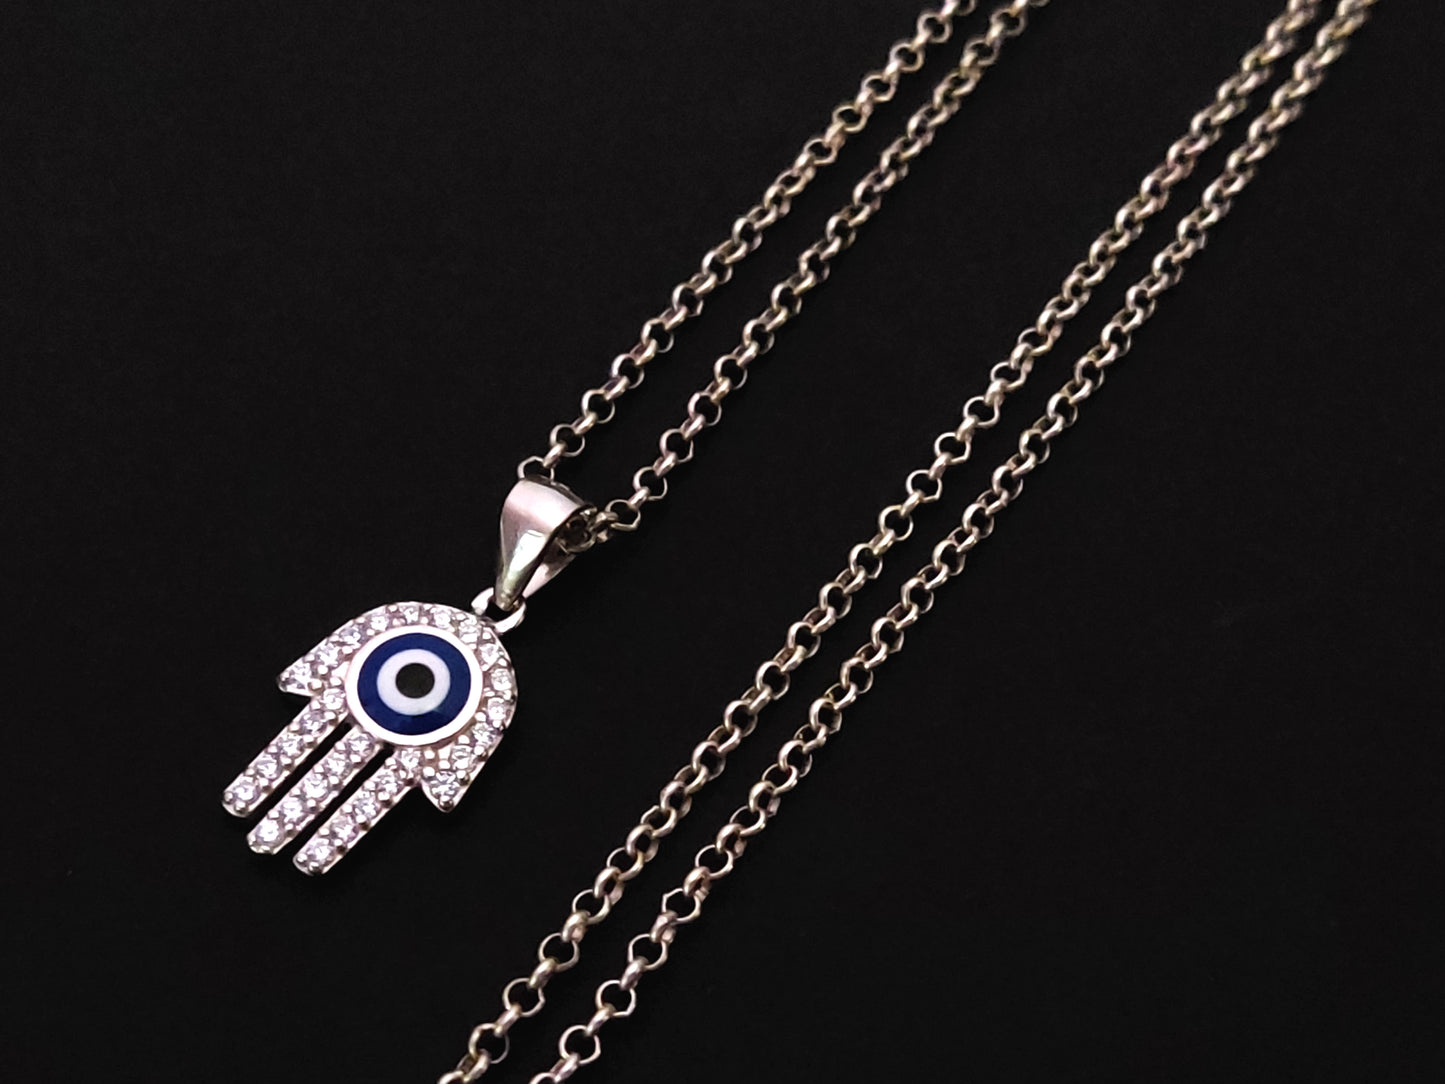 Image: Sterling Silver Evil Eye Jewelry Pendant with Mother Of Pearl, Mati Hamsa Nazar Design, 10x15mm, Hallmark 925, Made in Greece